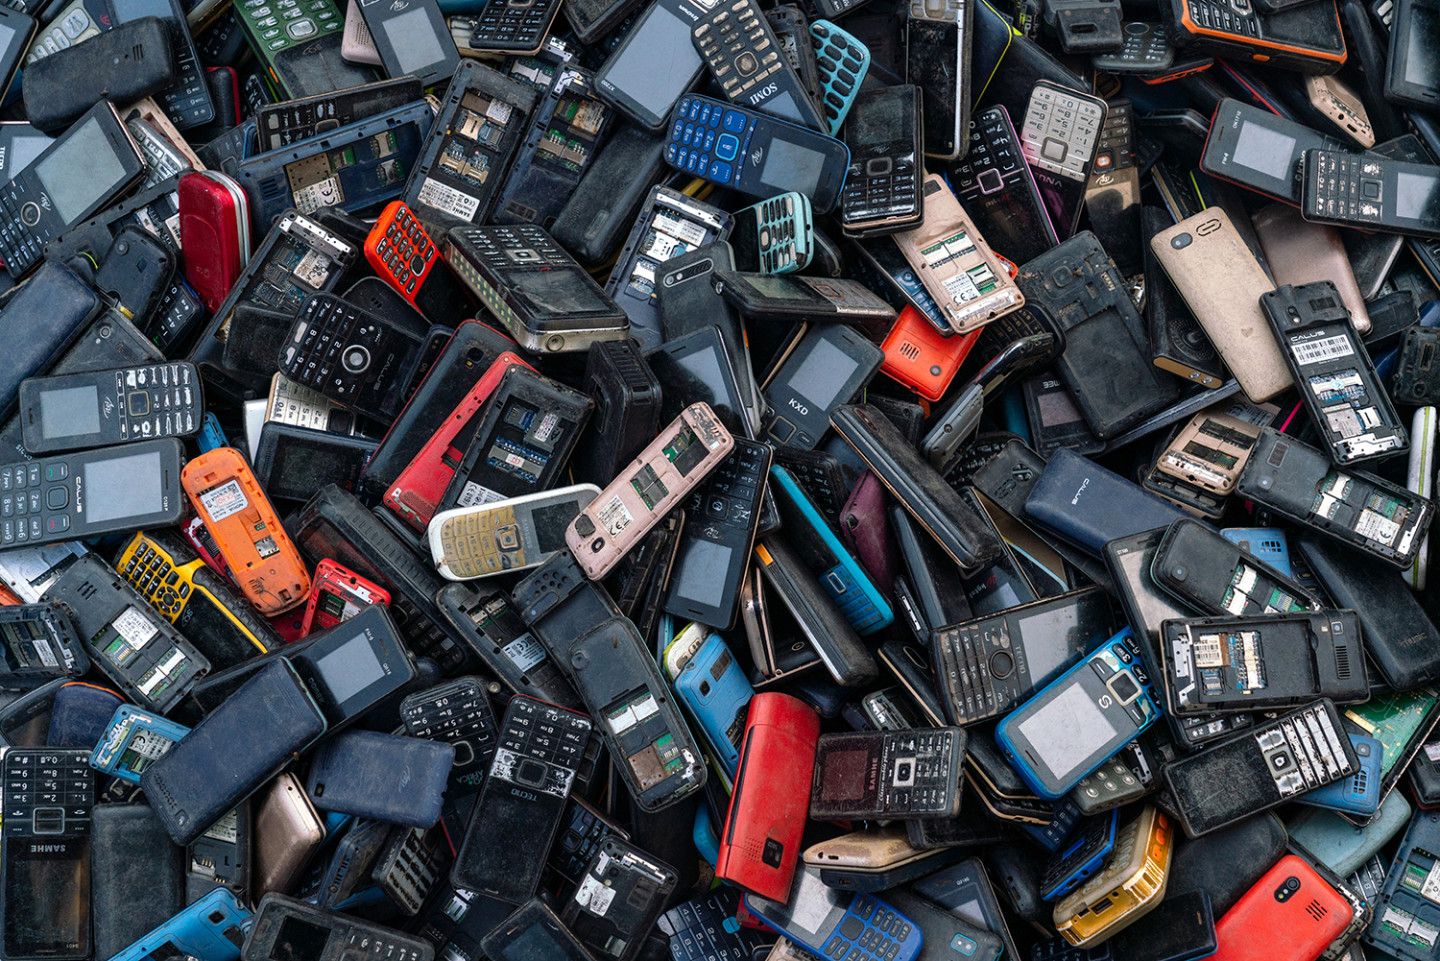 Old Fadama, Accra, Ghana, February 7, 2023. Locally collected end-of-life mobile phones sold for parts and recycling. © Muntaka Chasant for Fondation Carmignac